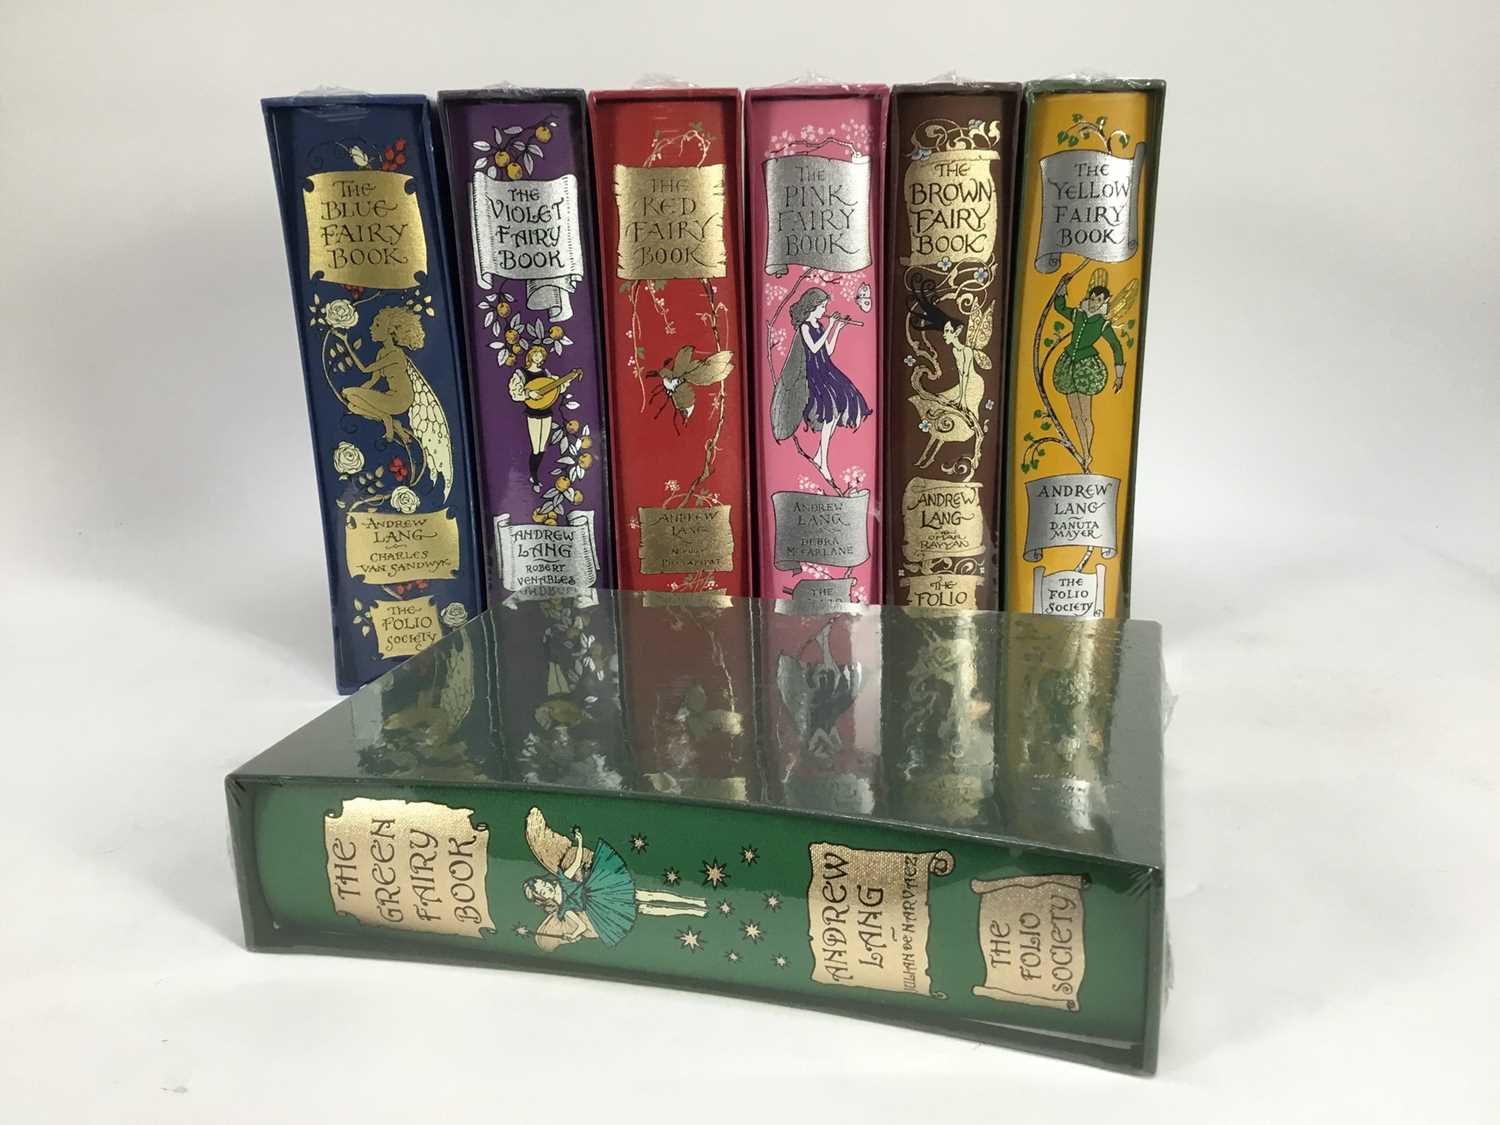 Seven Folio Society Rainbow Fairy Books by Andrew Lang, still sealed in original plastic wrapping - Image 7 of 7